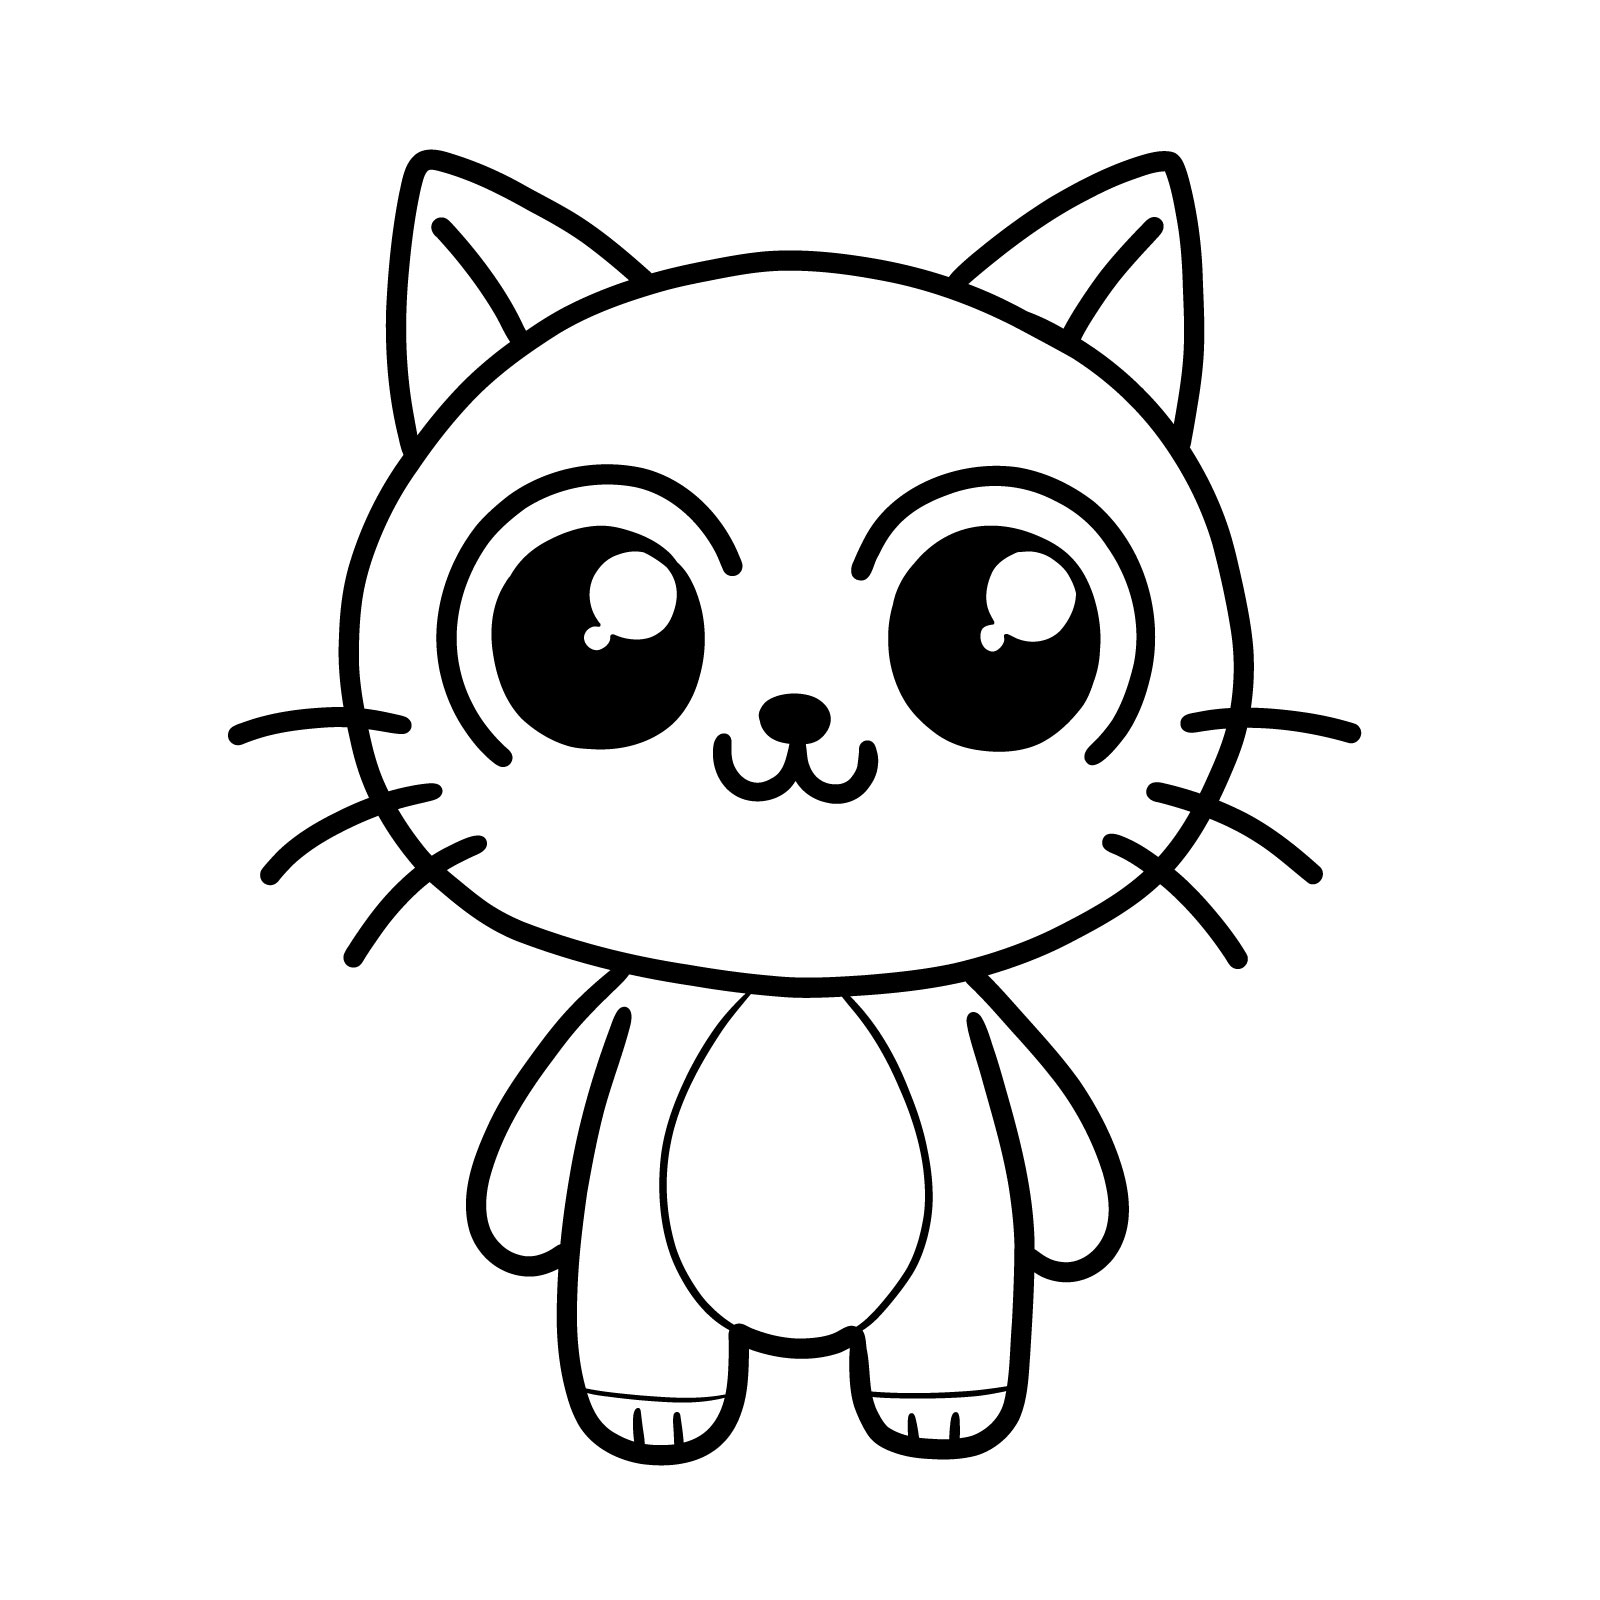 Completed drawing of an easy bipedal cartoon cat - step 08